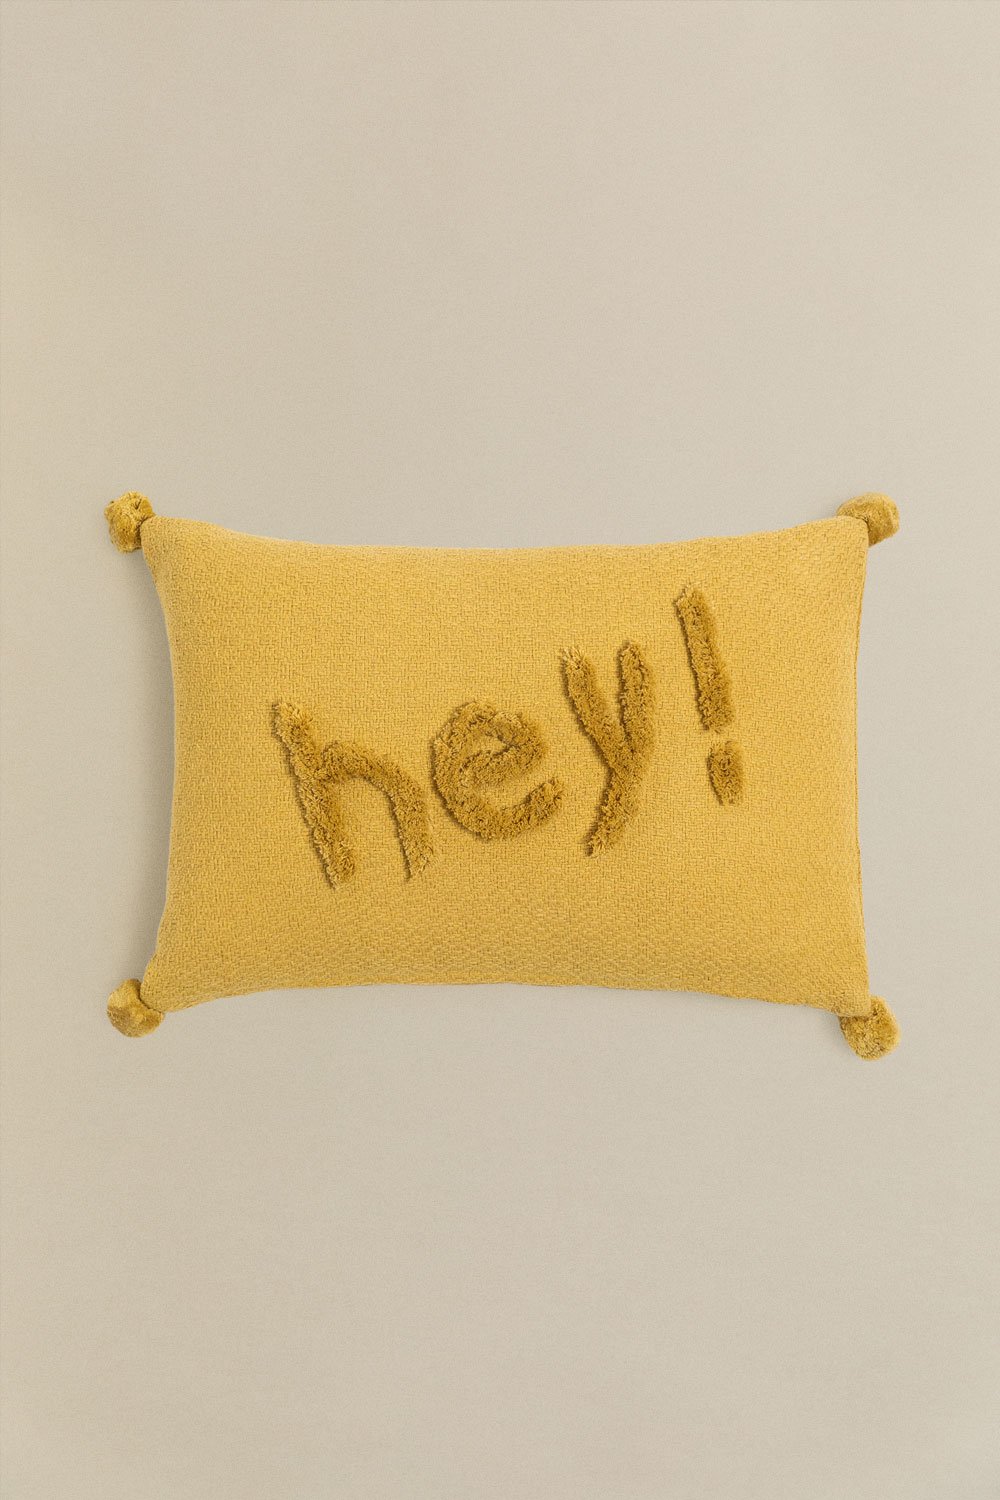 Cushion with Cotton Embroidery (34x48 cm) Jei , gallery image 1